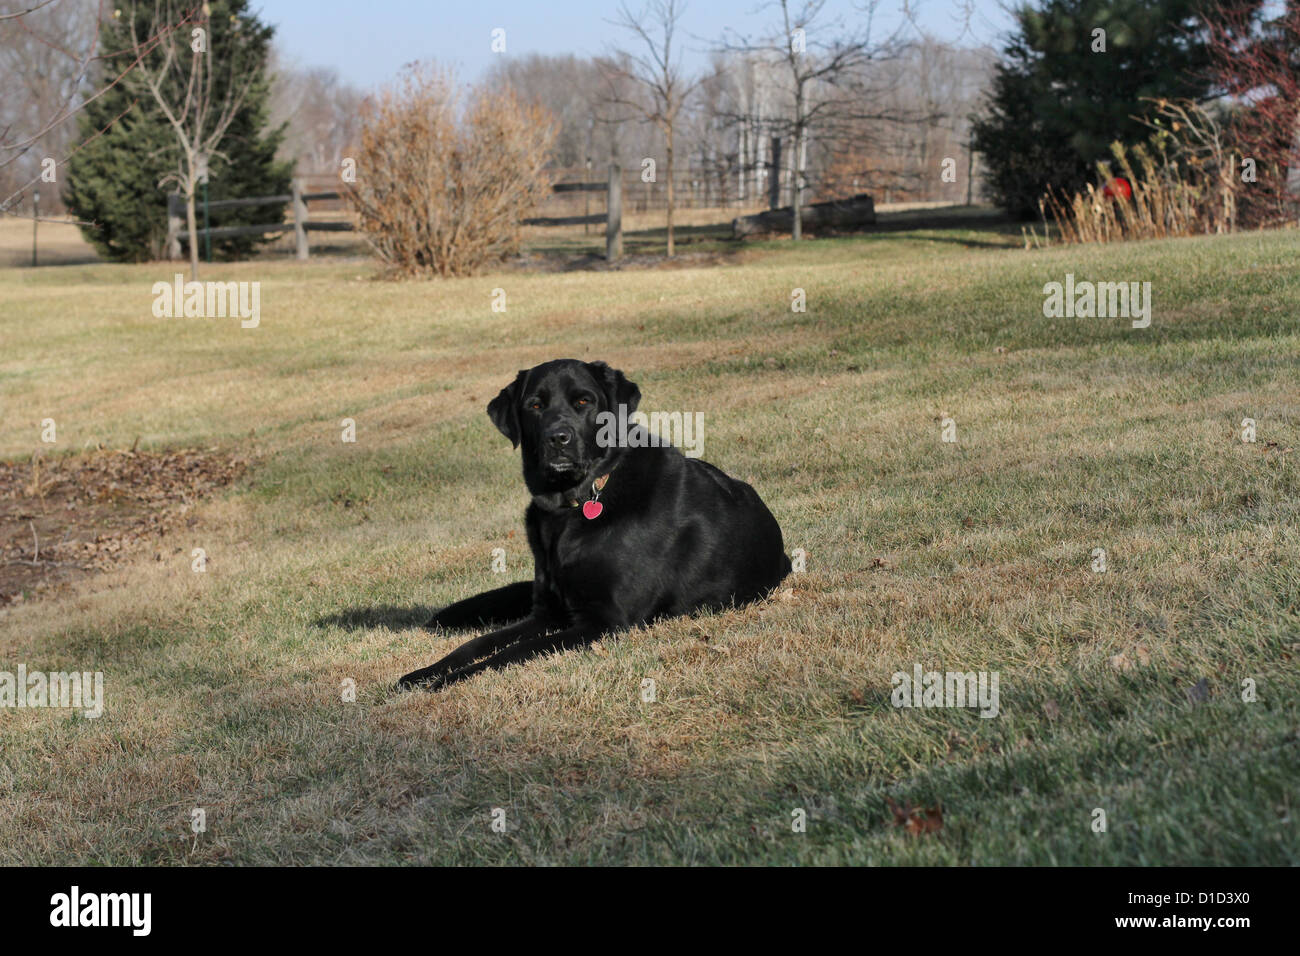 A black dog lying on a lawn in rural Minnesota. Stock Photo